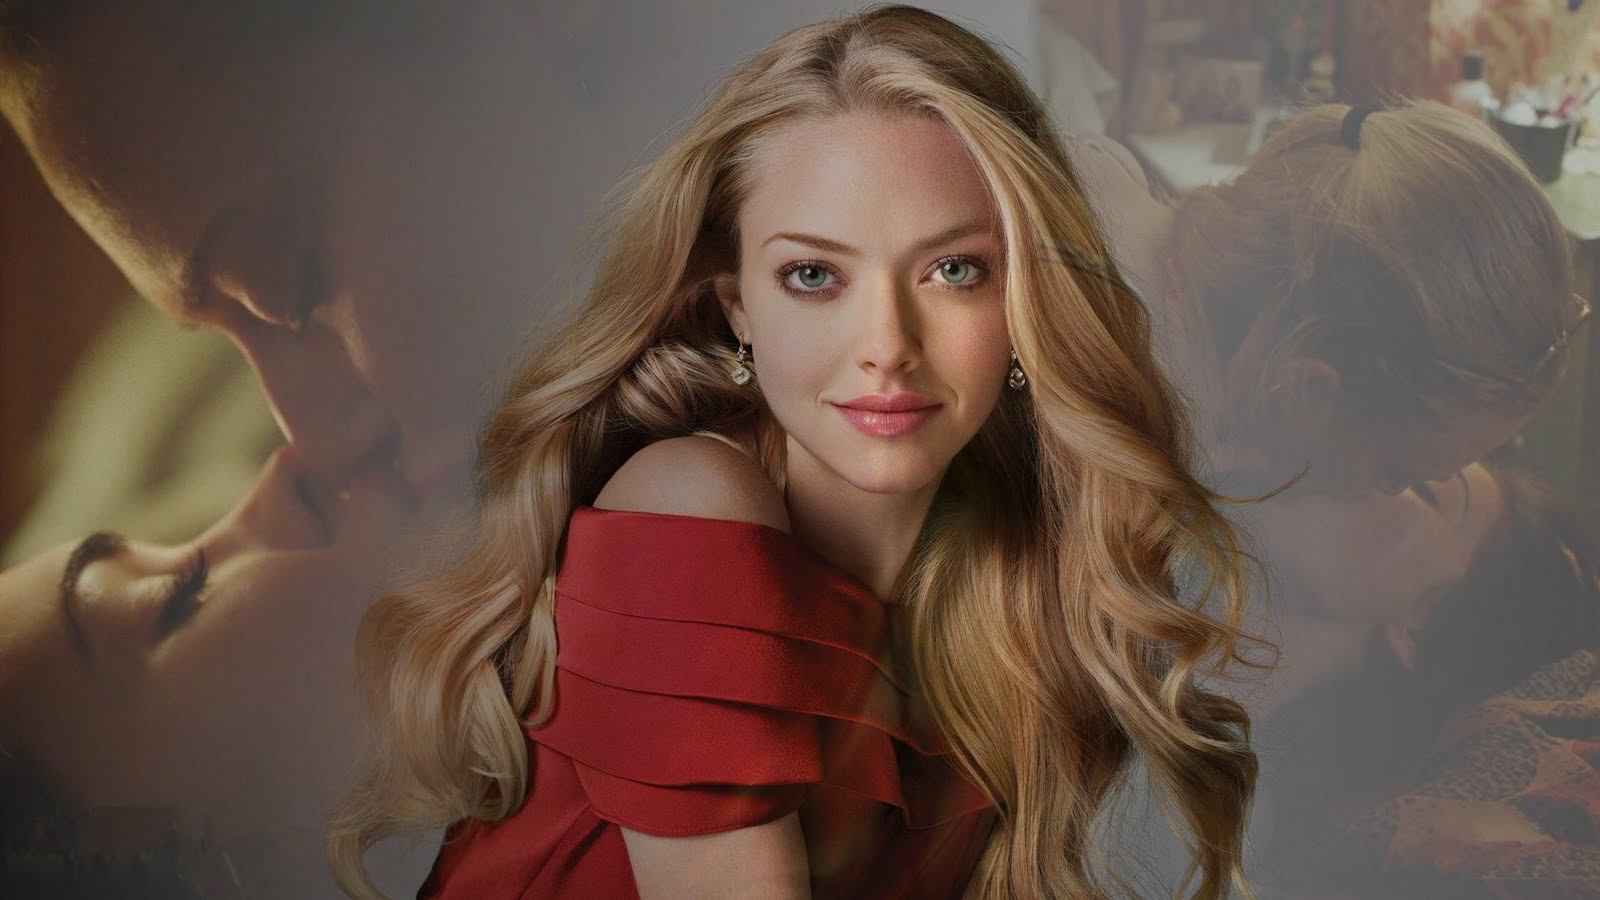 Amanda Seyfried Pictures Photos And Wallpapers Hollywood Actress Wallpapers Hd Celebrity